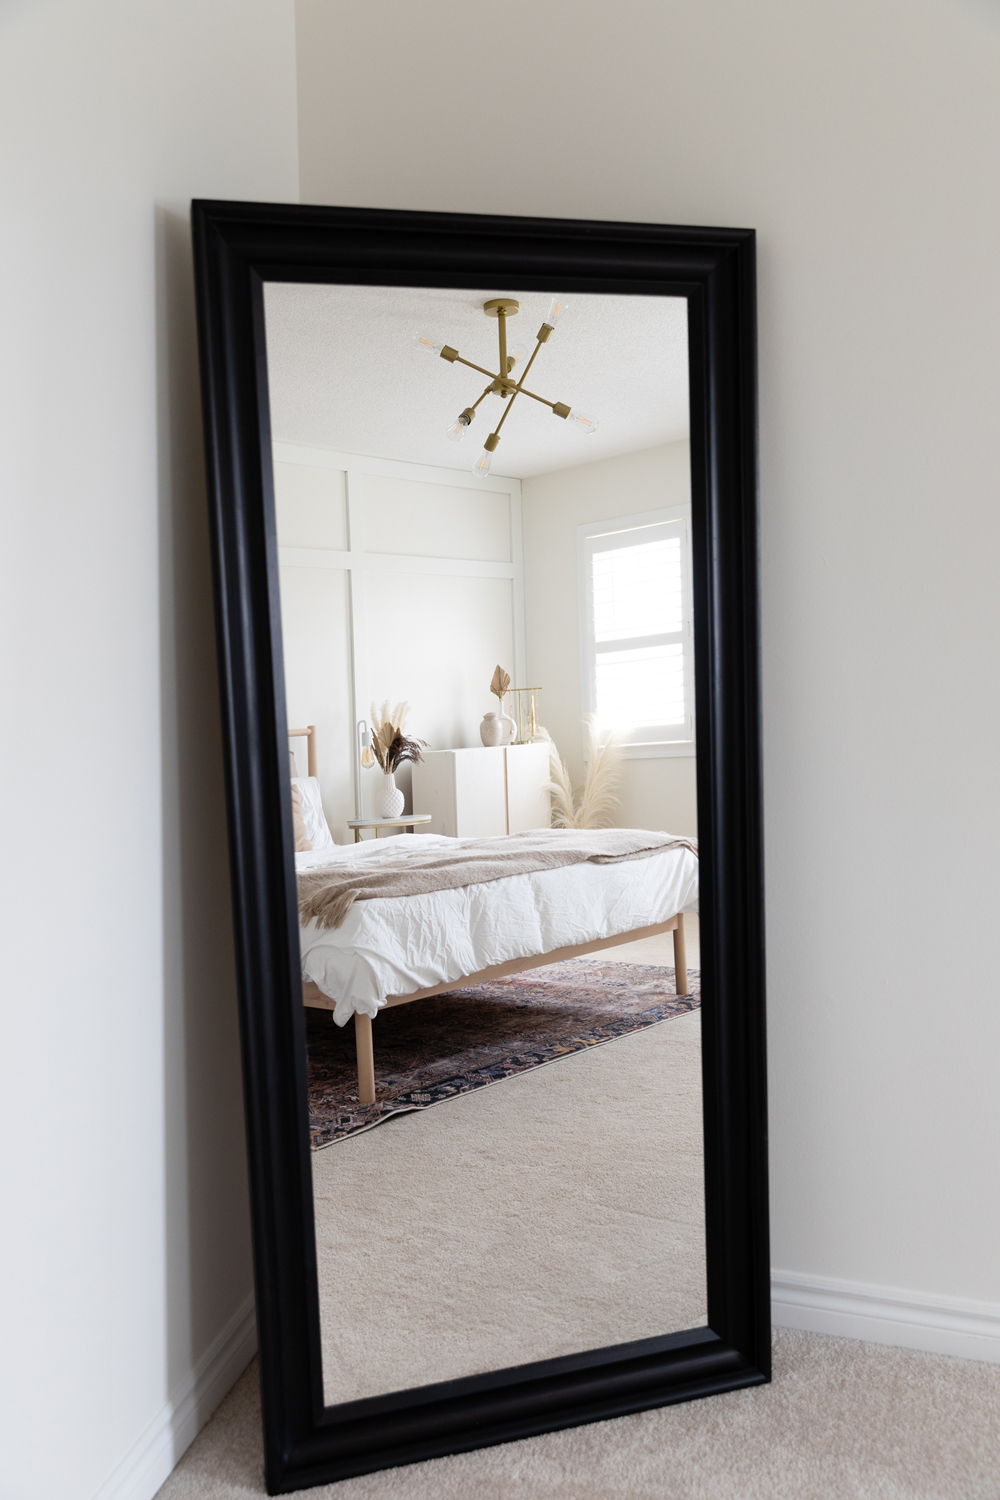 Lauren Sheriff home tour showing leaning mirror in bedroom